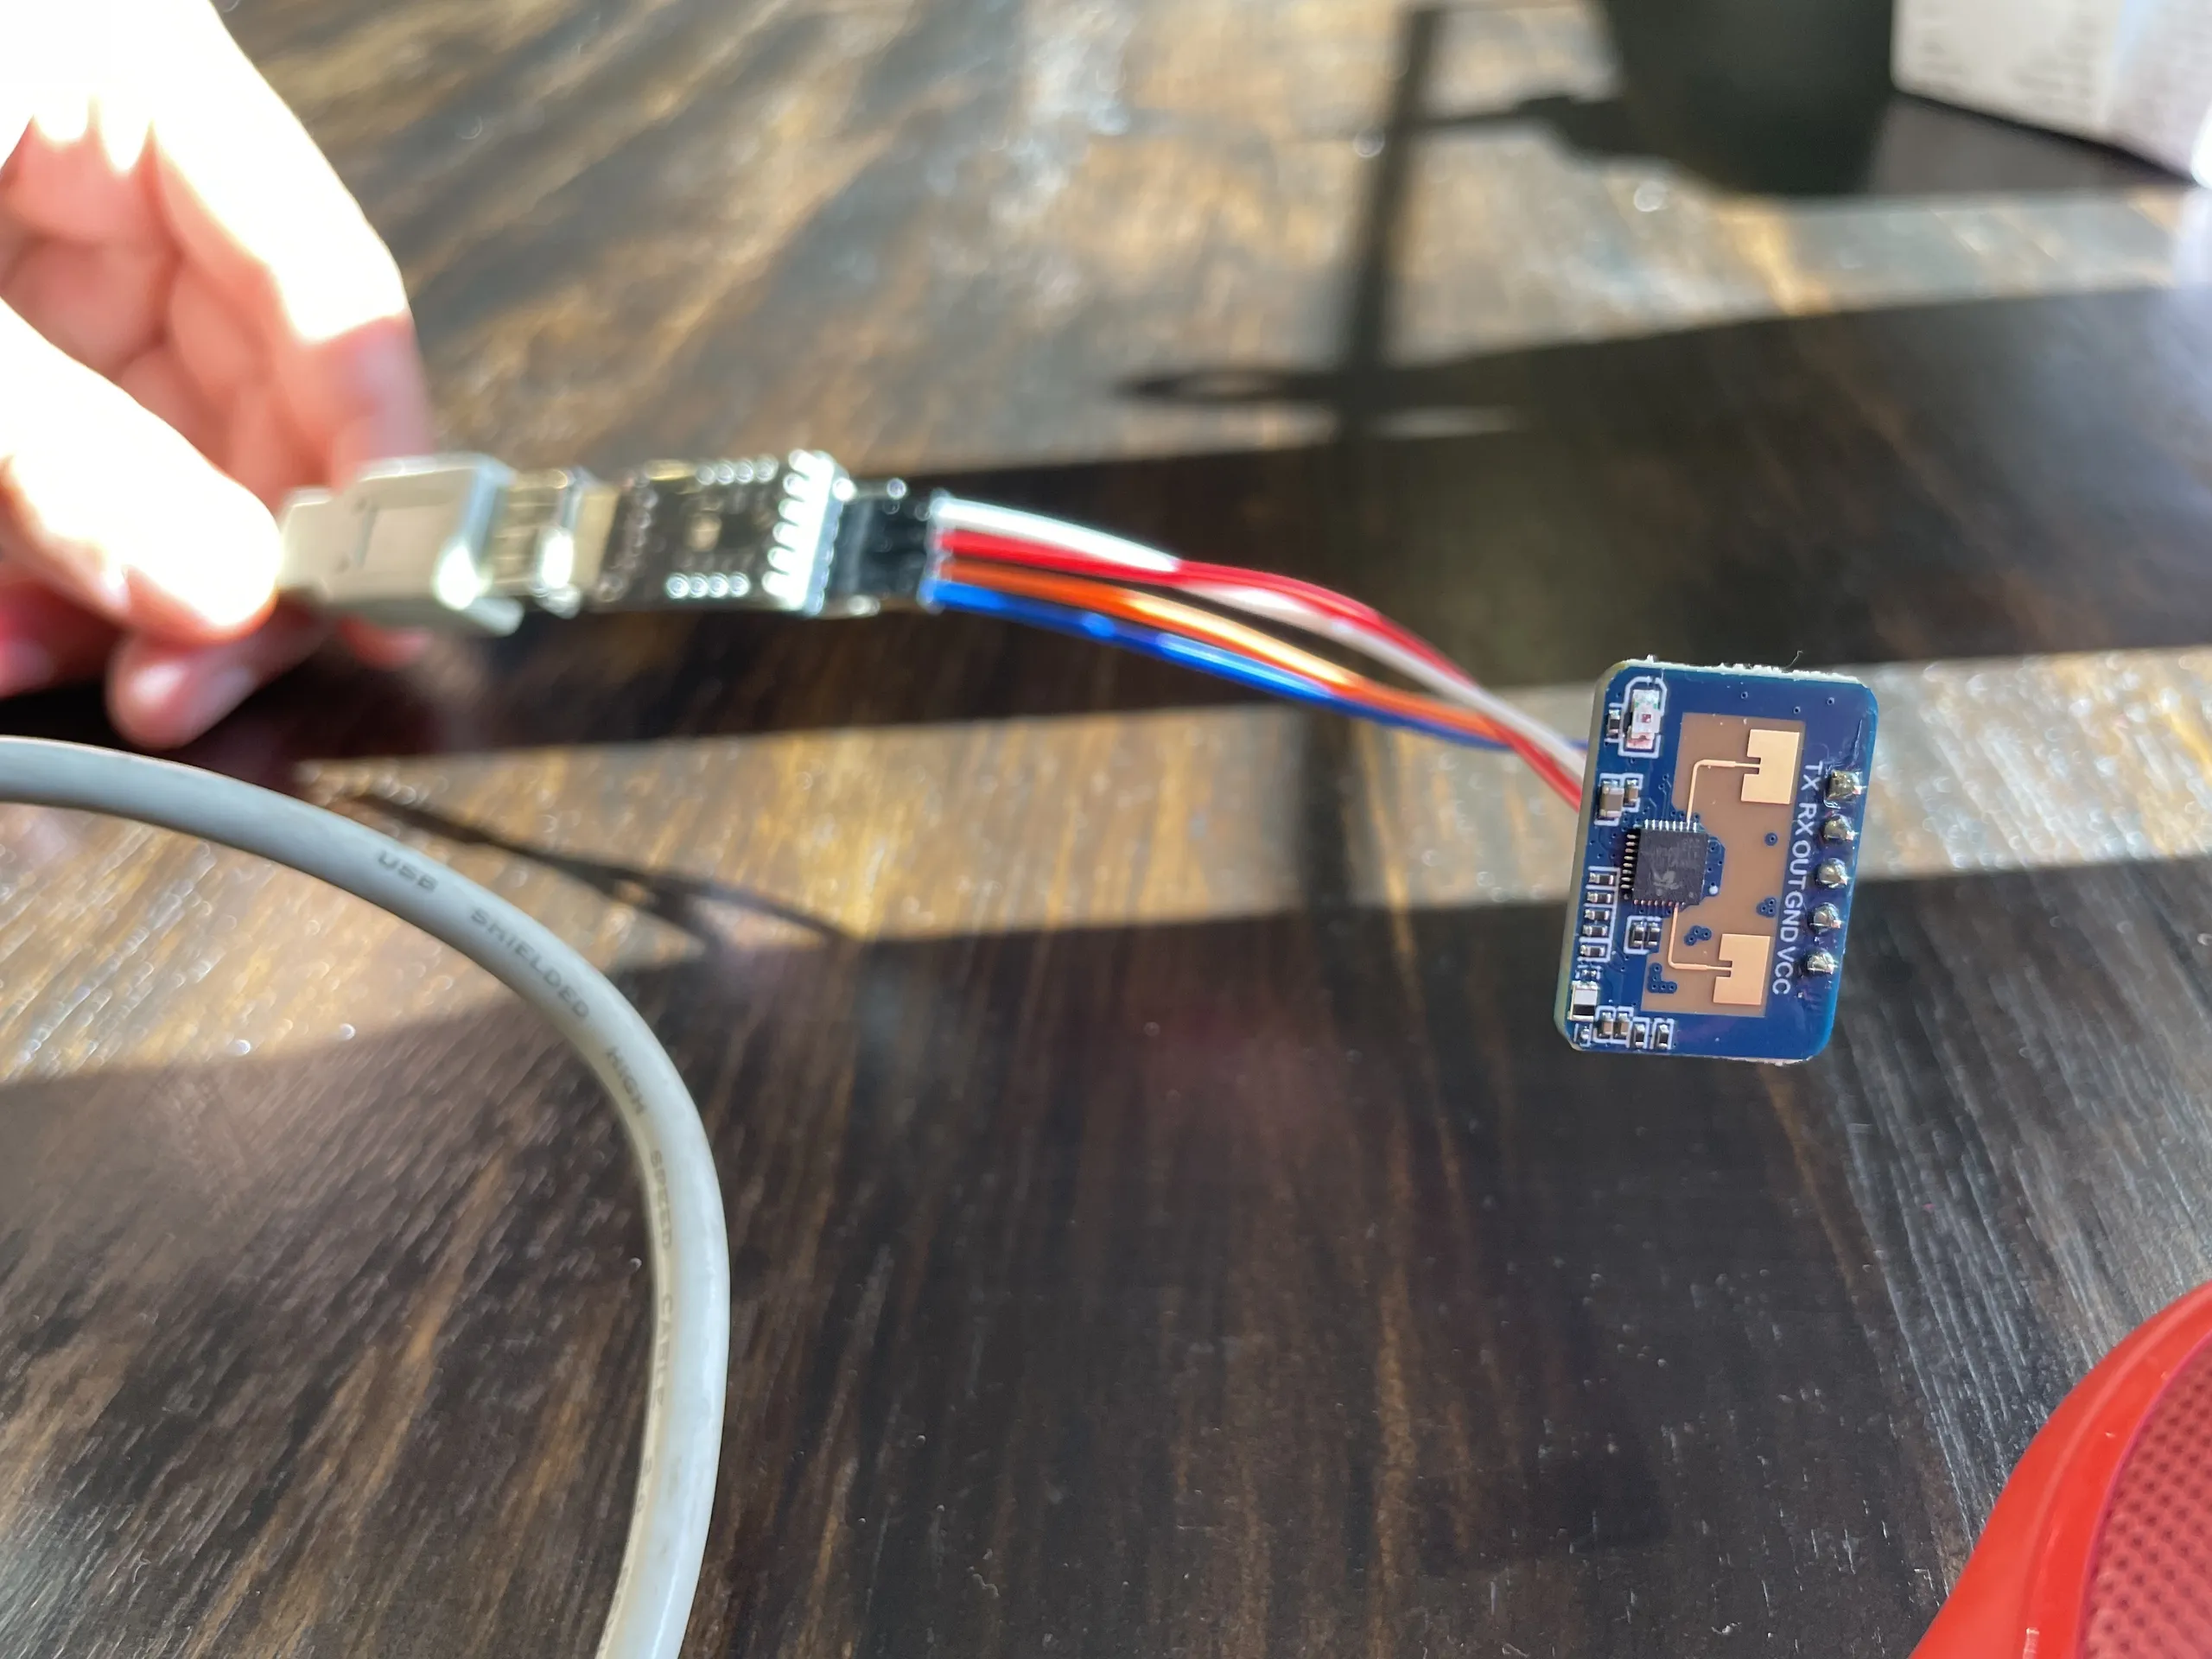 LD2410C sensor connected to serial adapter